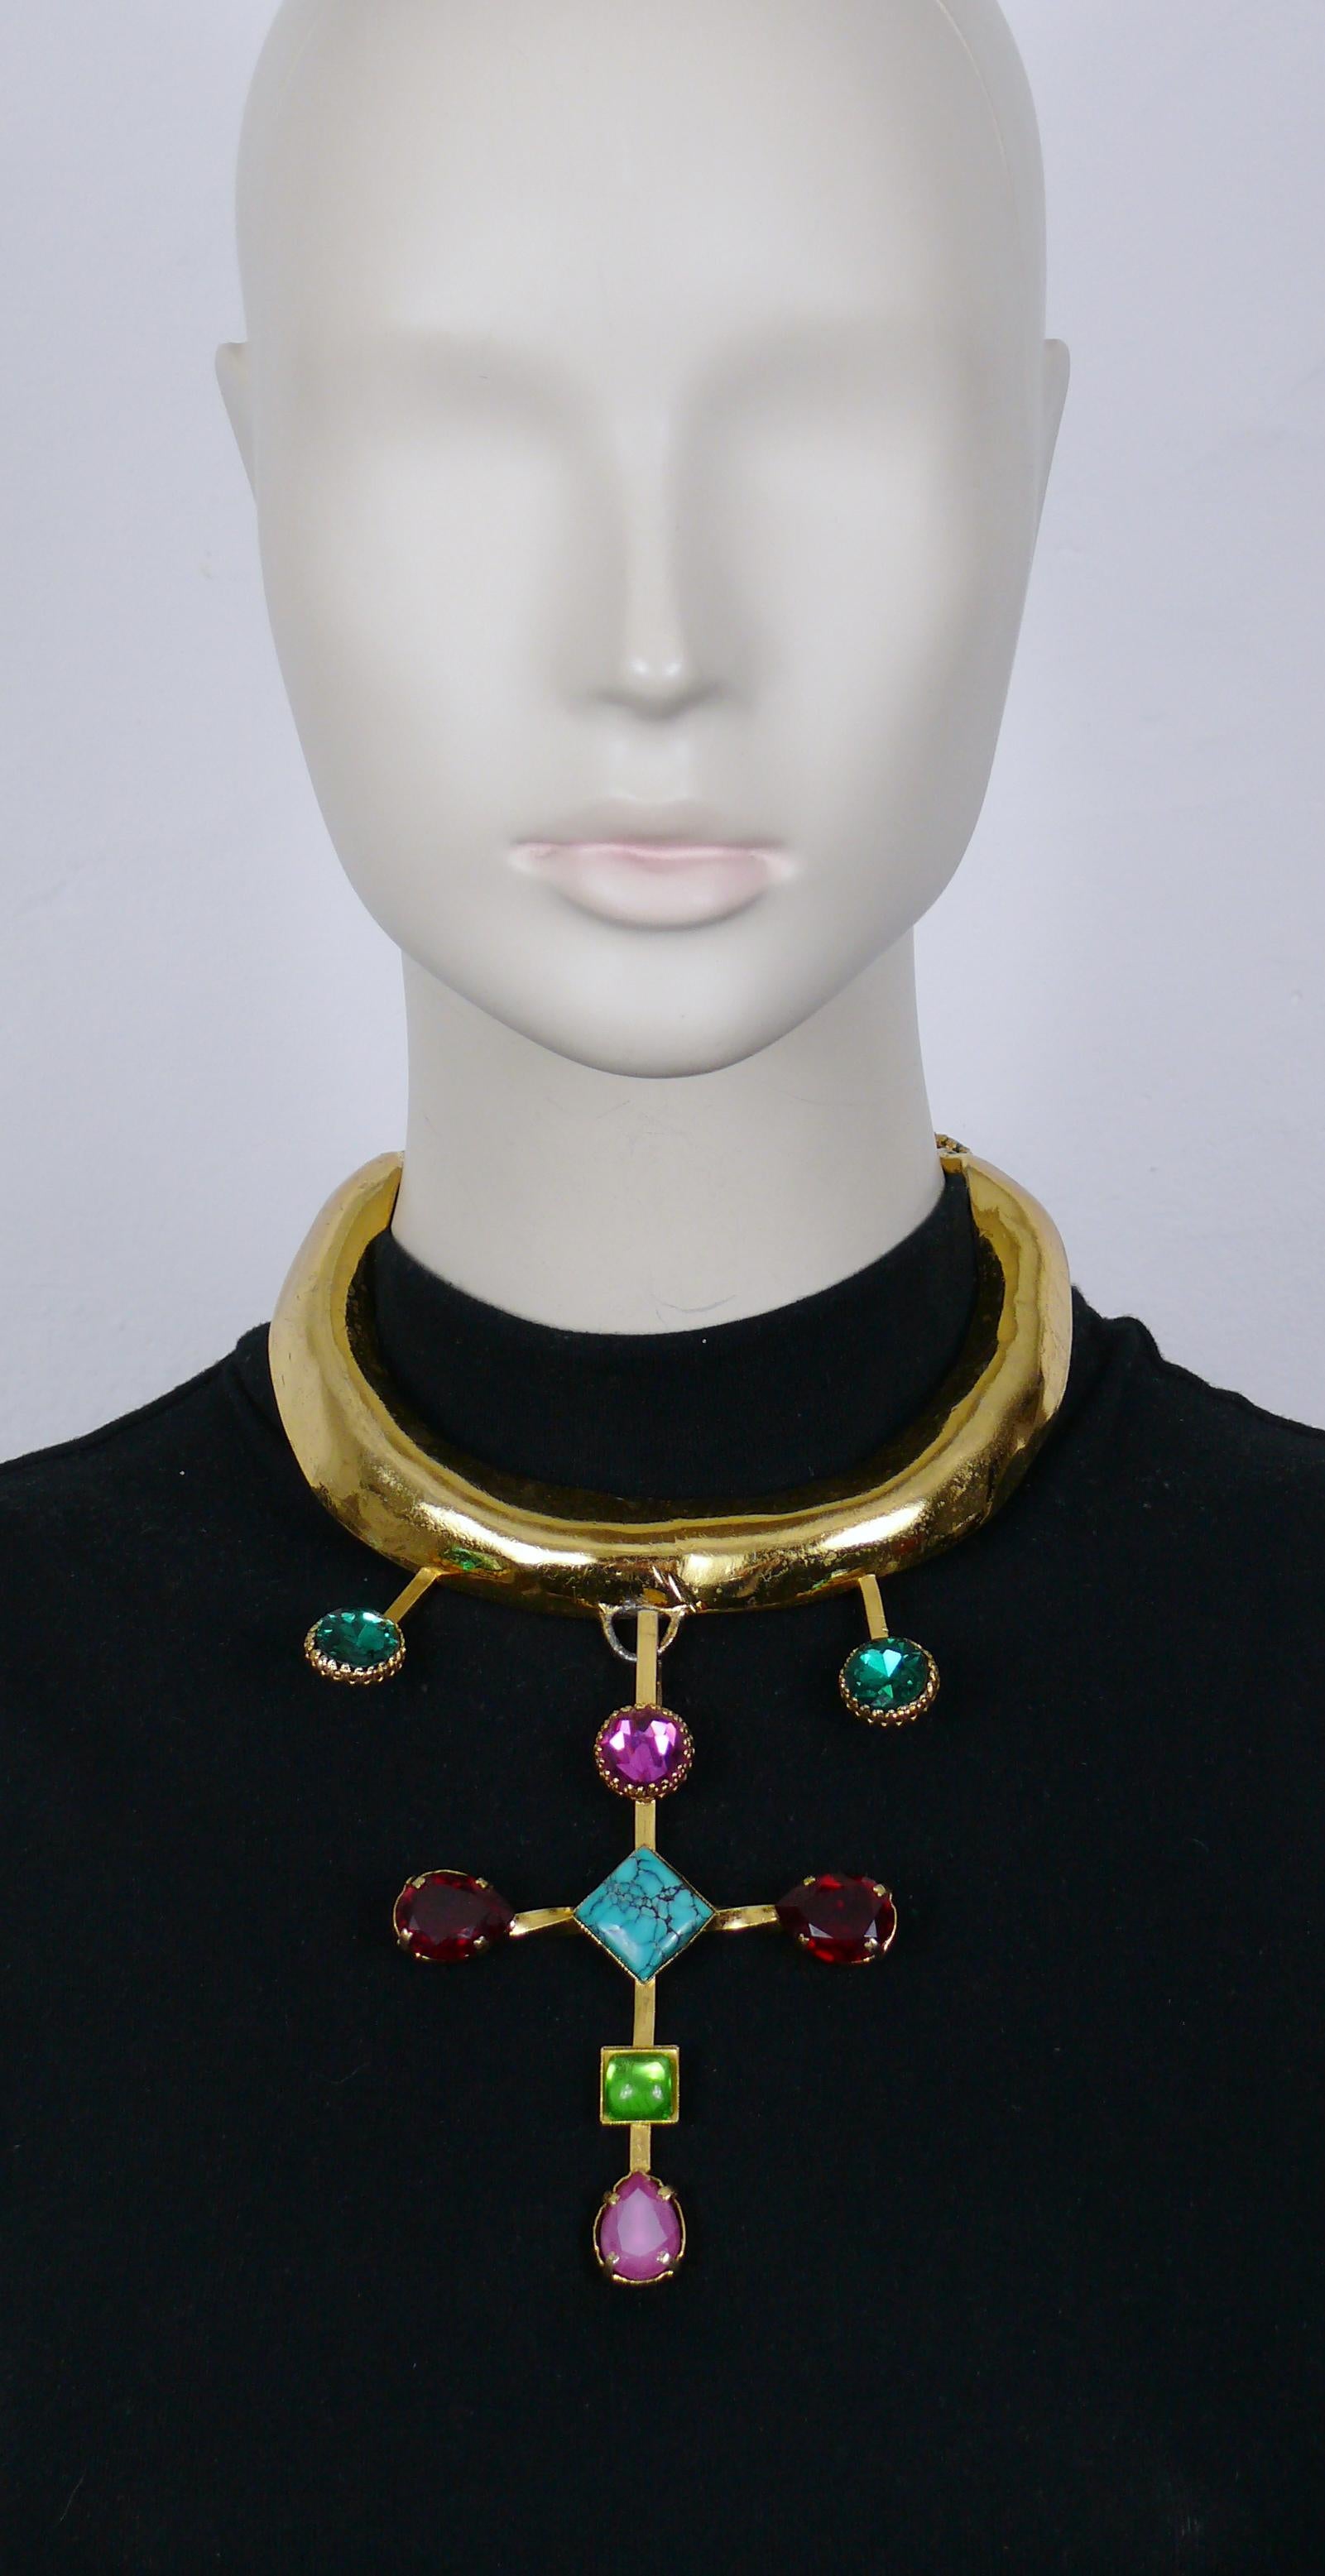 CHRISTIAN LACROIX vintage textured gold tone torque necklace featuring a cross pendant embellished with multicolored crystals, glass and faux turquoise cabochons.

Adjustable hook clasp closure.

Embossed CL Paris.

Indicative measurements : inner